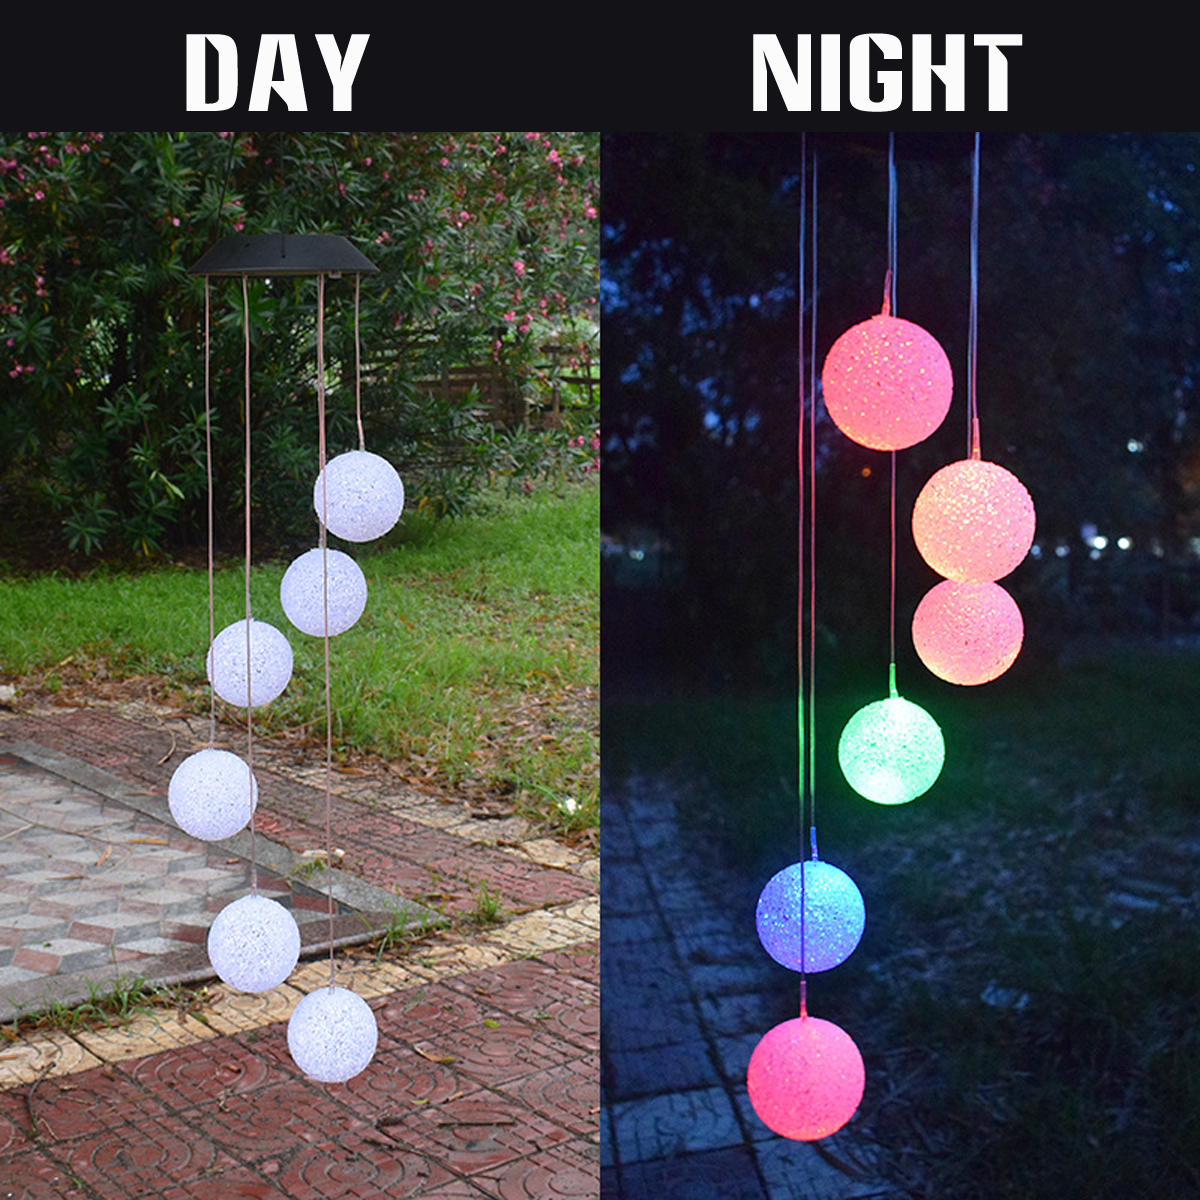 Aeolian-Hanging-Wind-Solar-LED-Lights-Chimes-Powered-String-Lawn-Garden-Lamp-1642749-8